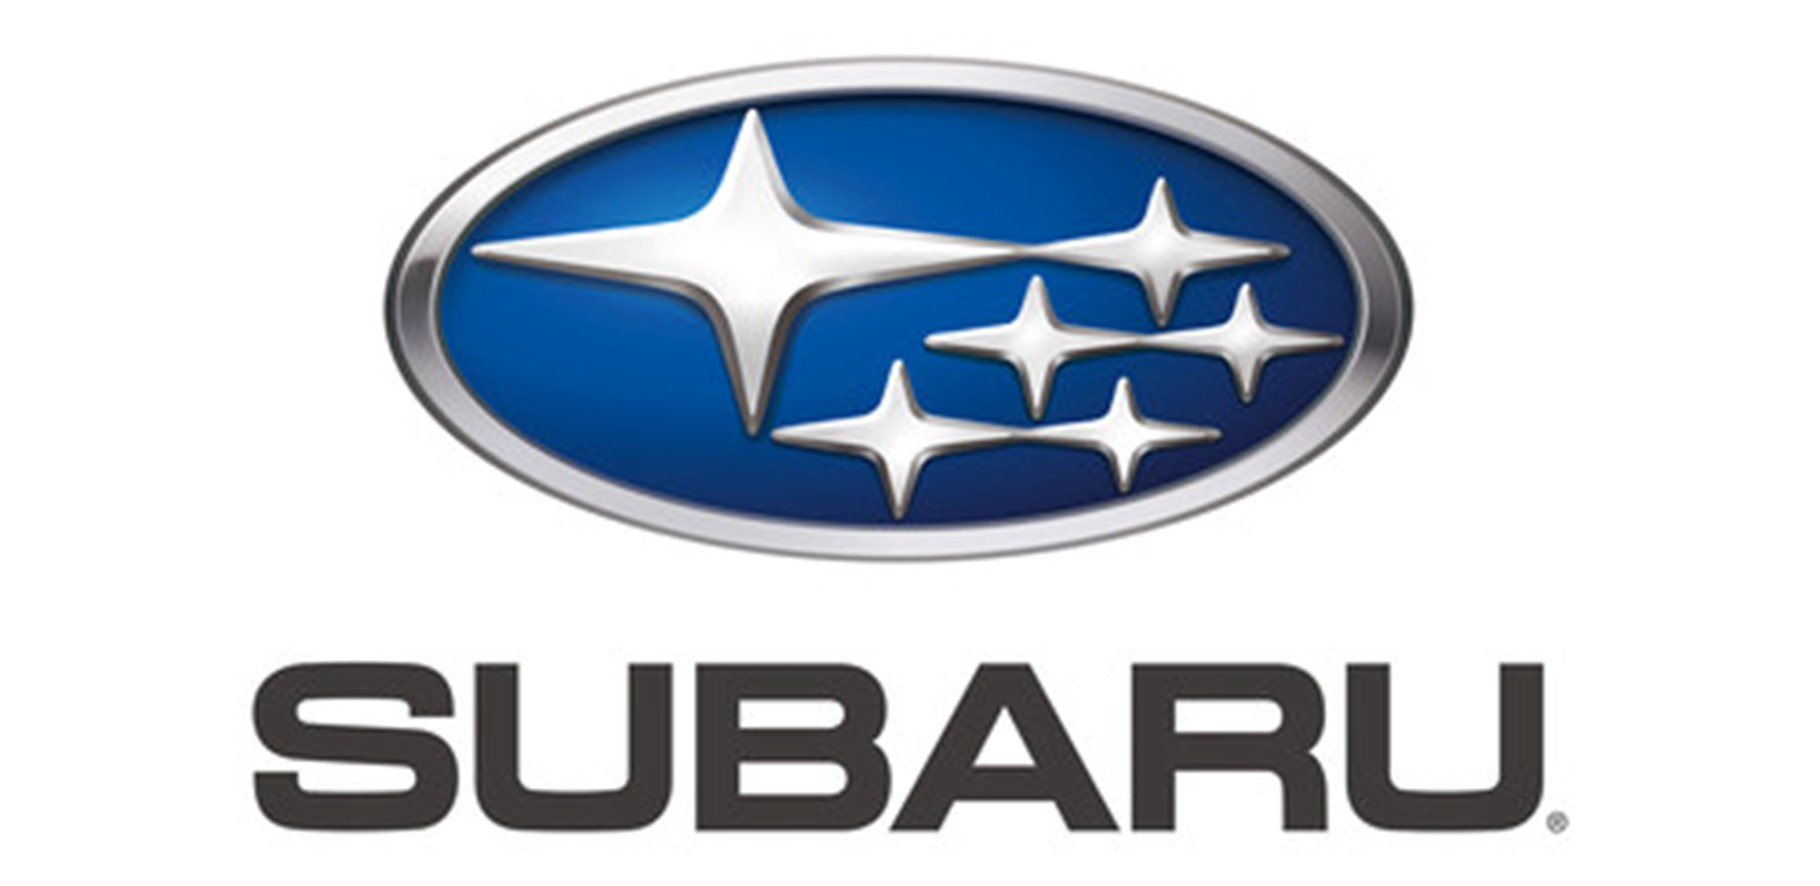 Subaru Recognized for Safety, Dependability and Product Quality for Second Consecutive Year